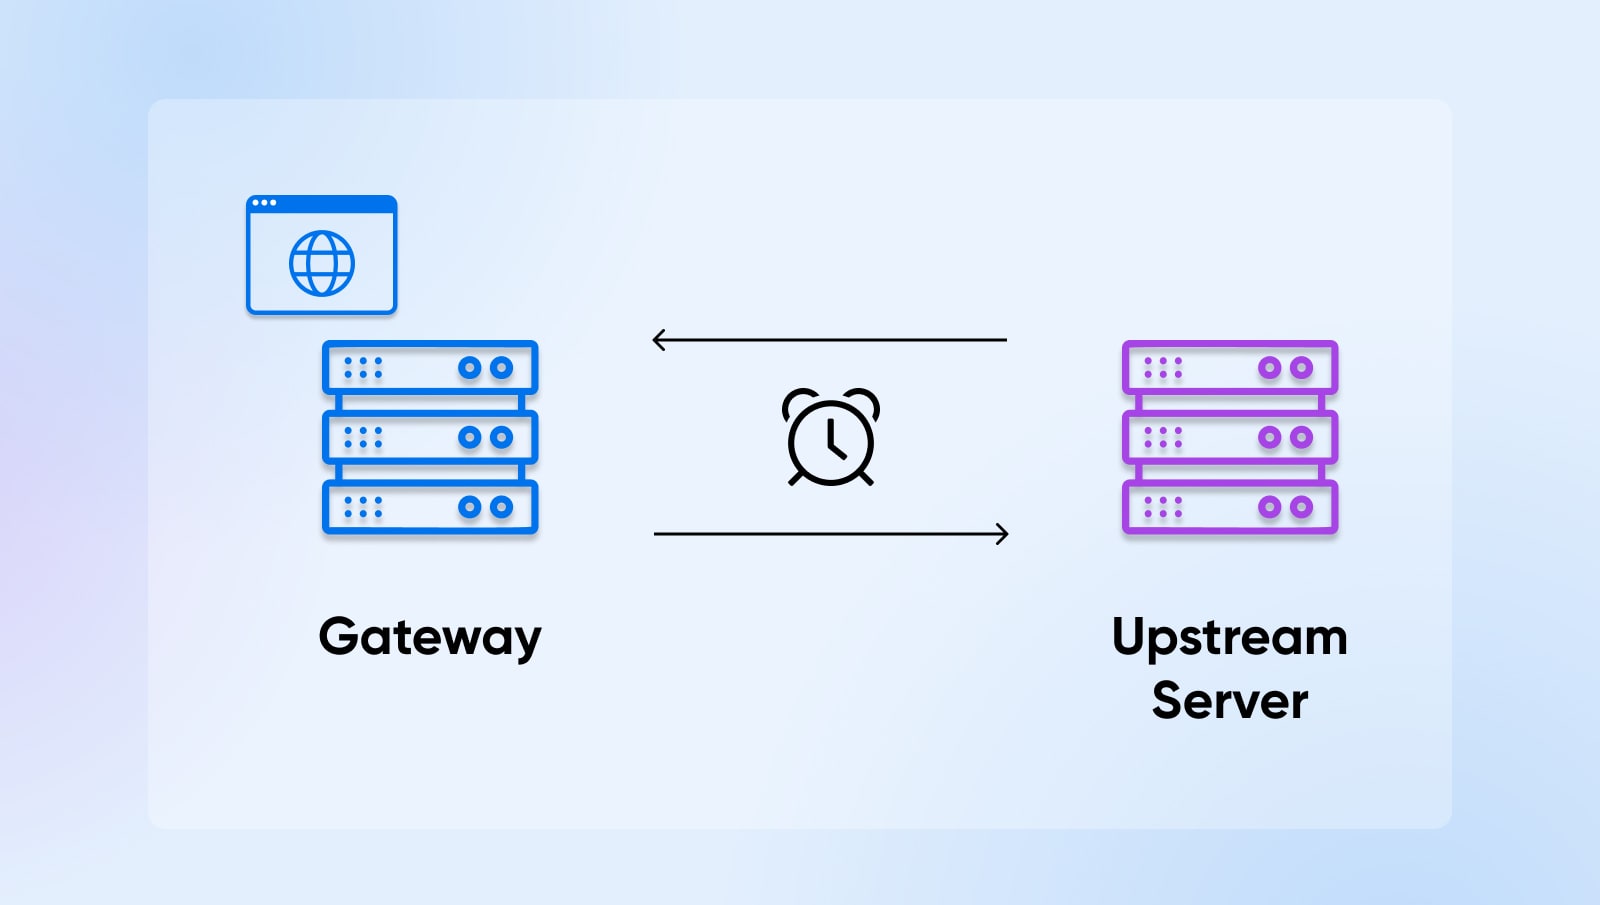 "Gateway" and "Upstream Server" diagram with a clock symbol in between the two to denote time taken.